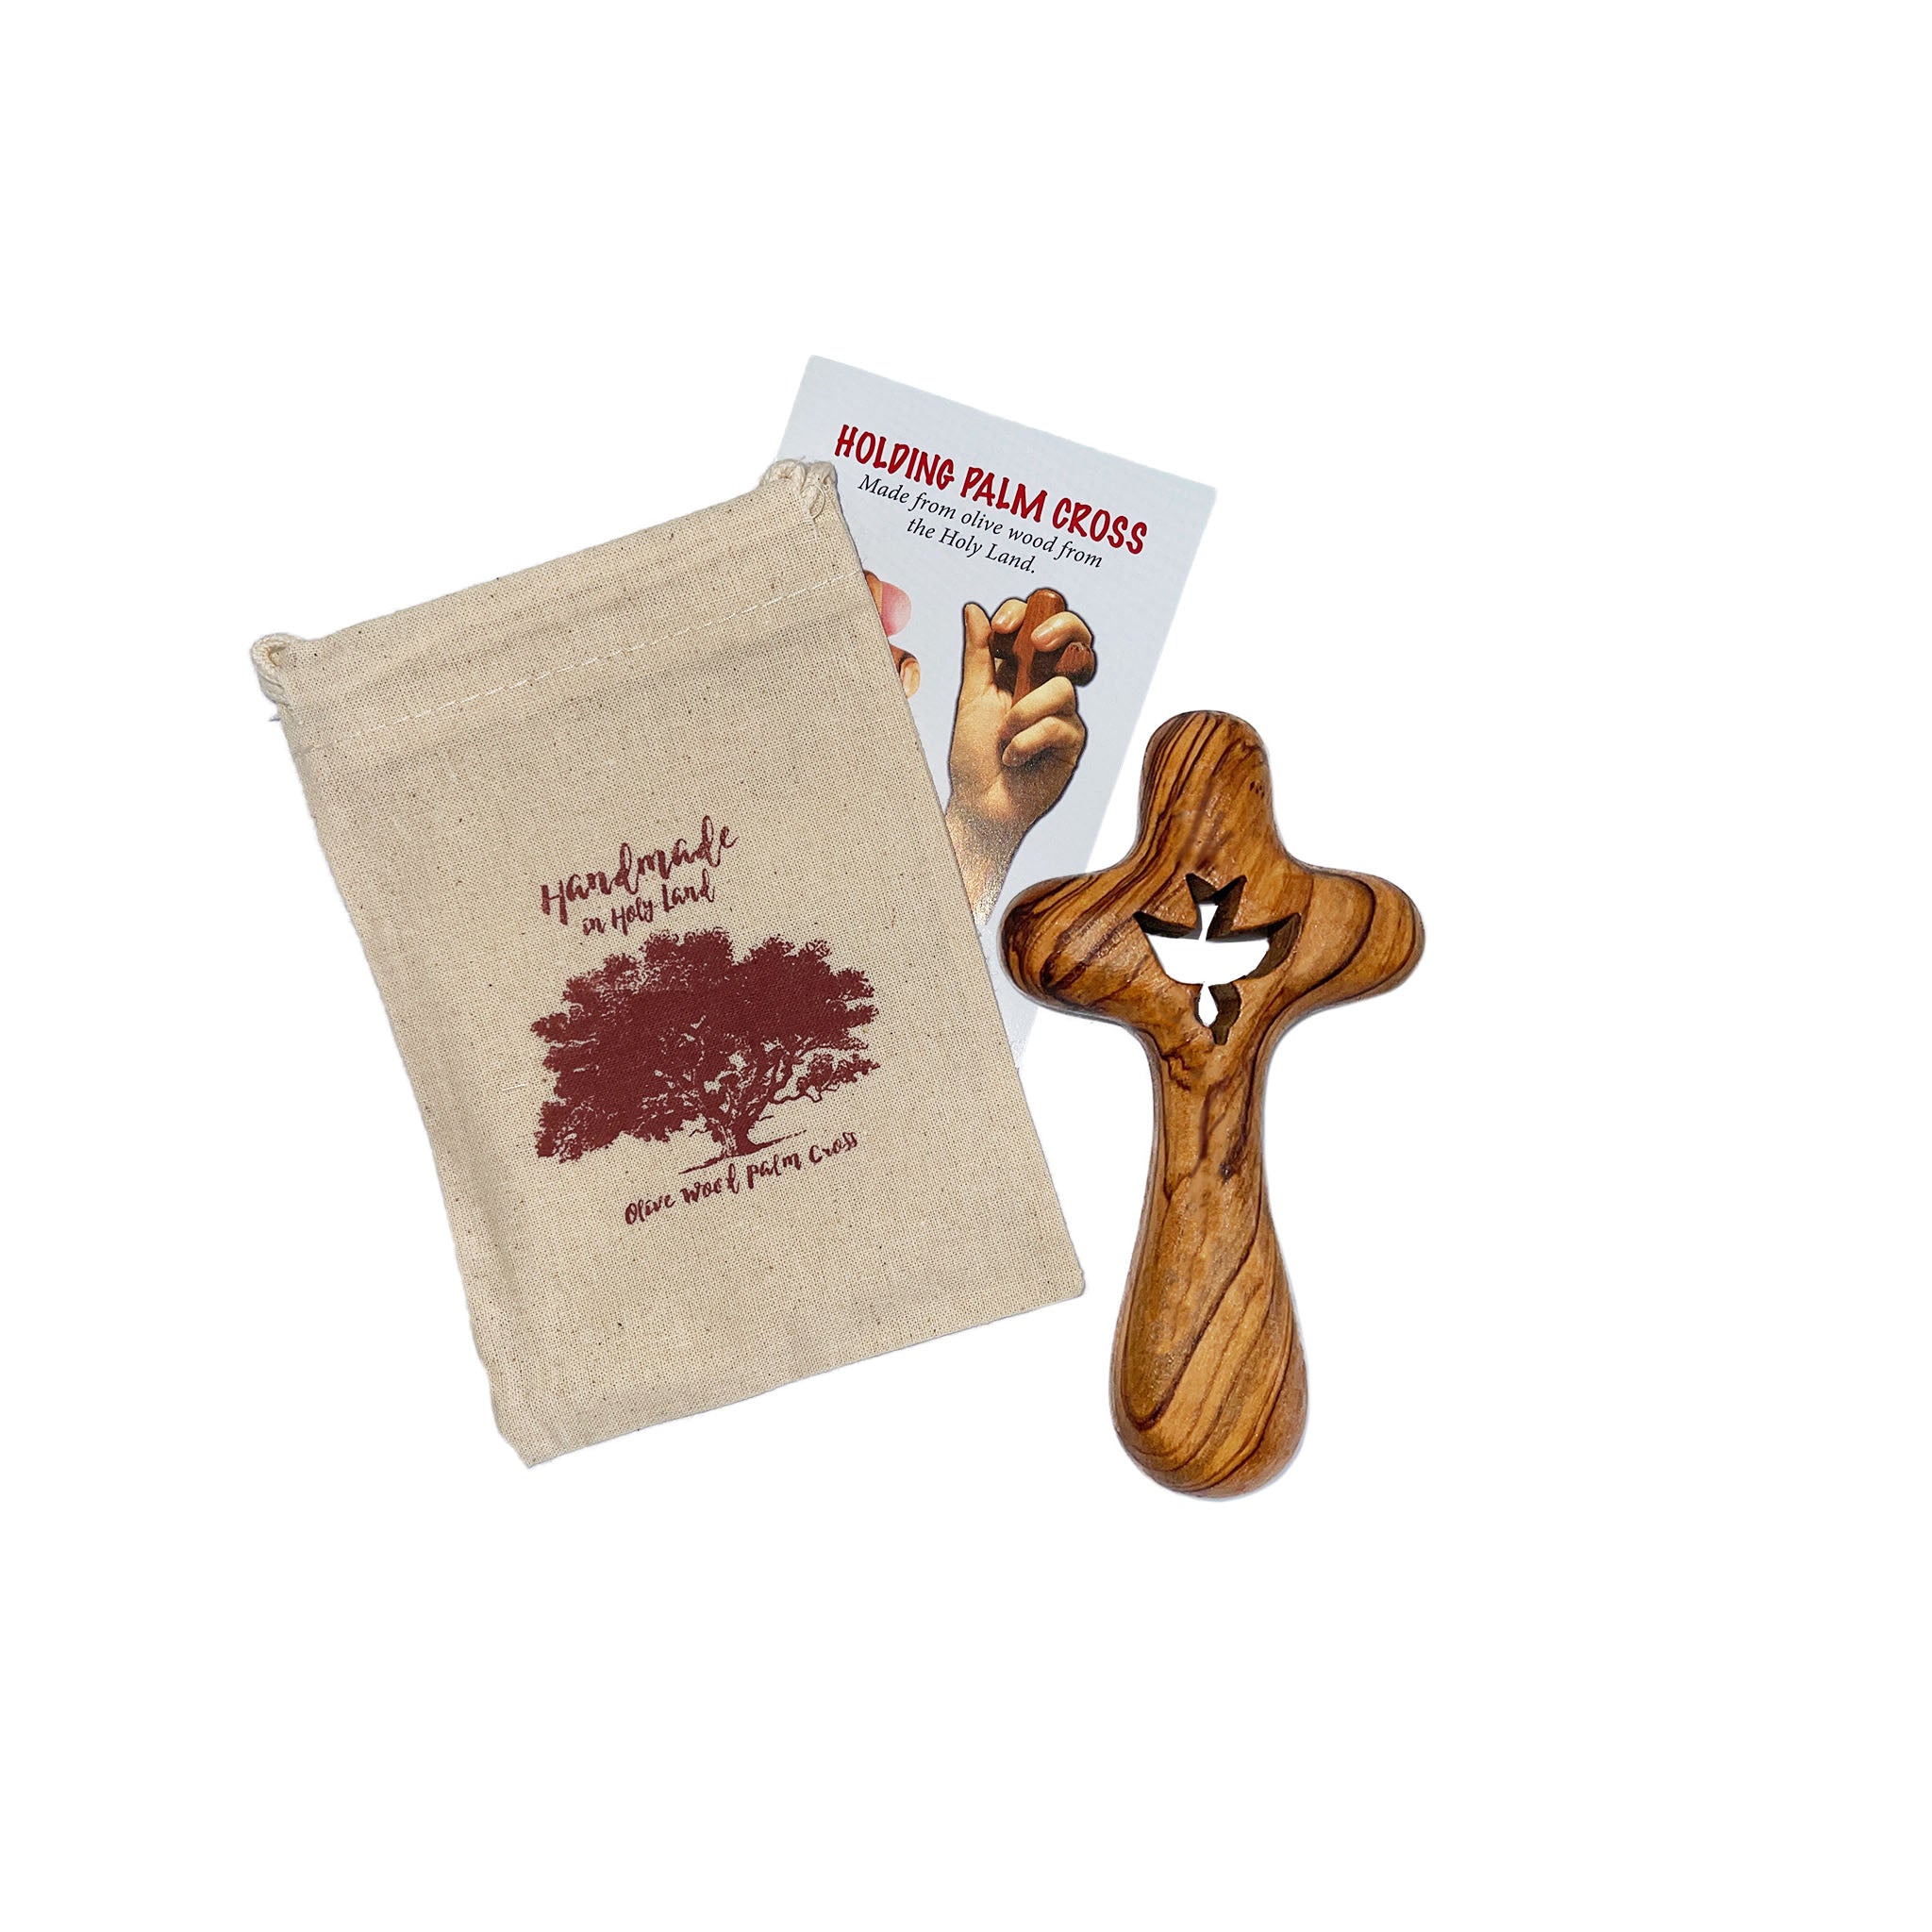 OLIVE WOOD HOLDING PALM CROSS WITH DOVE FROM HOLY LAND